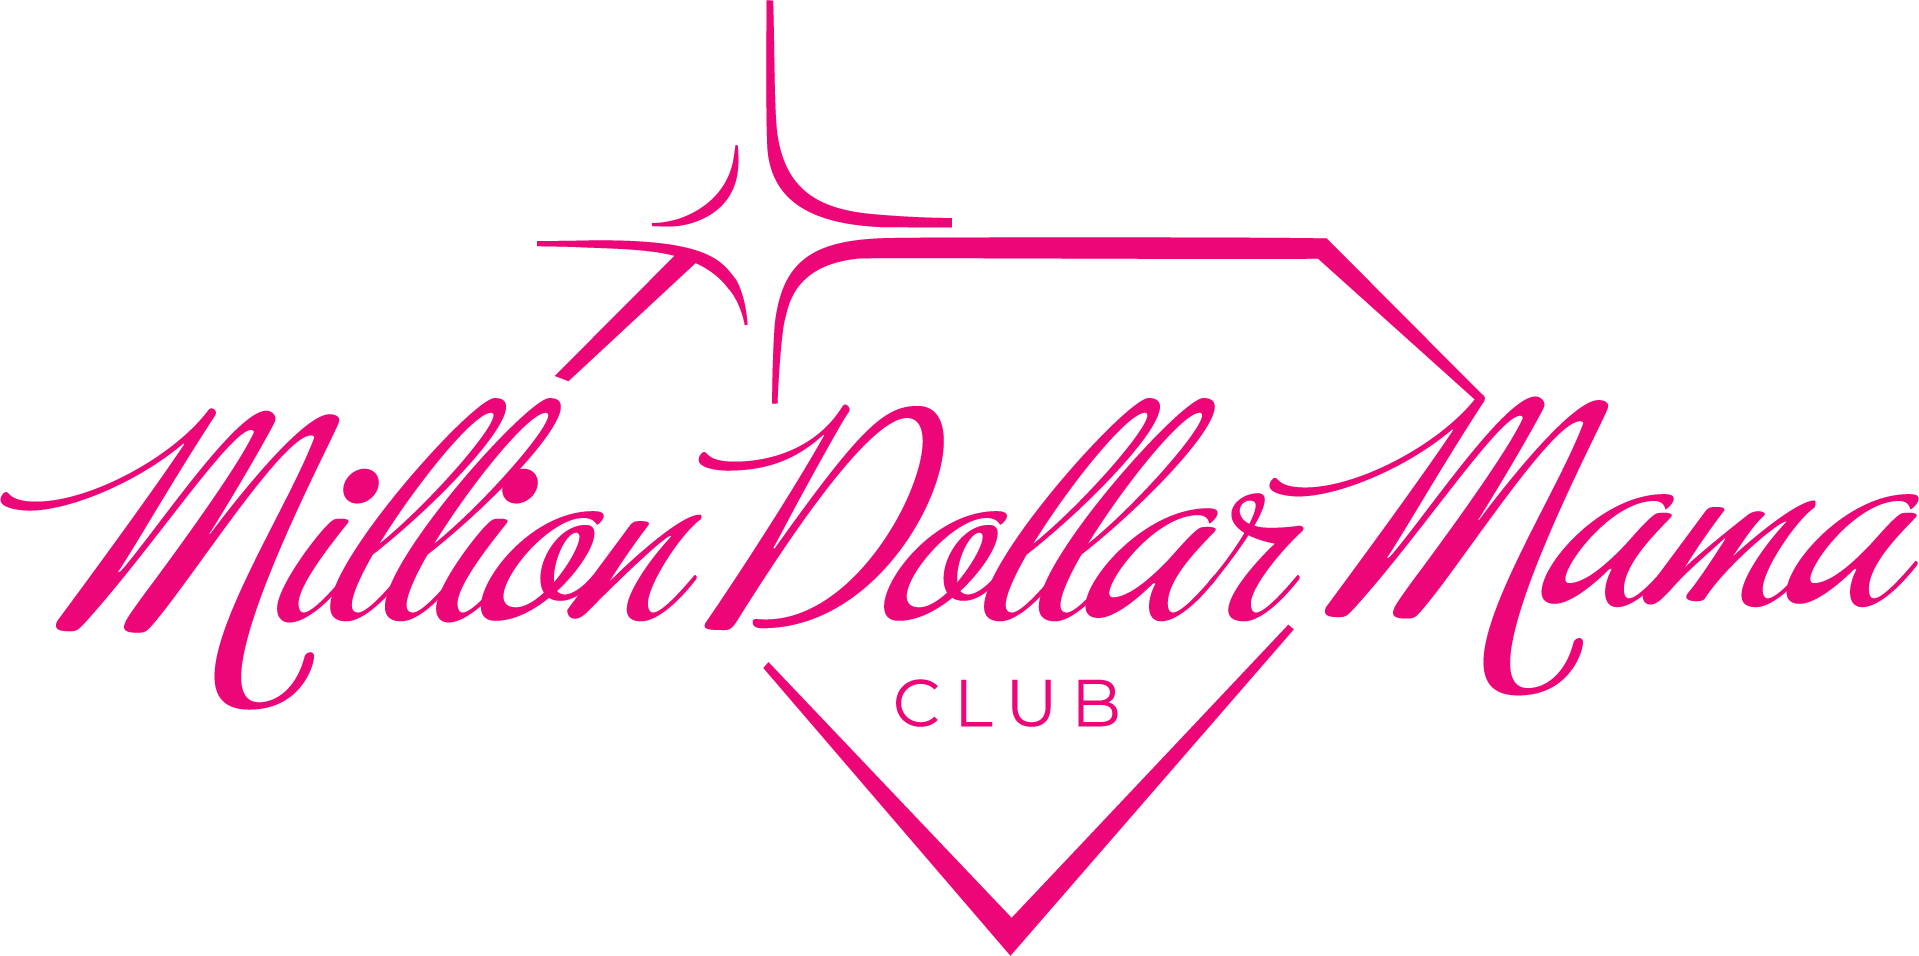 What is the million dollar club?